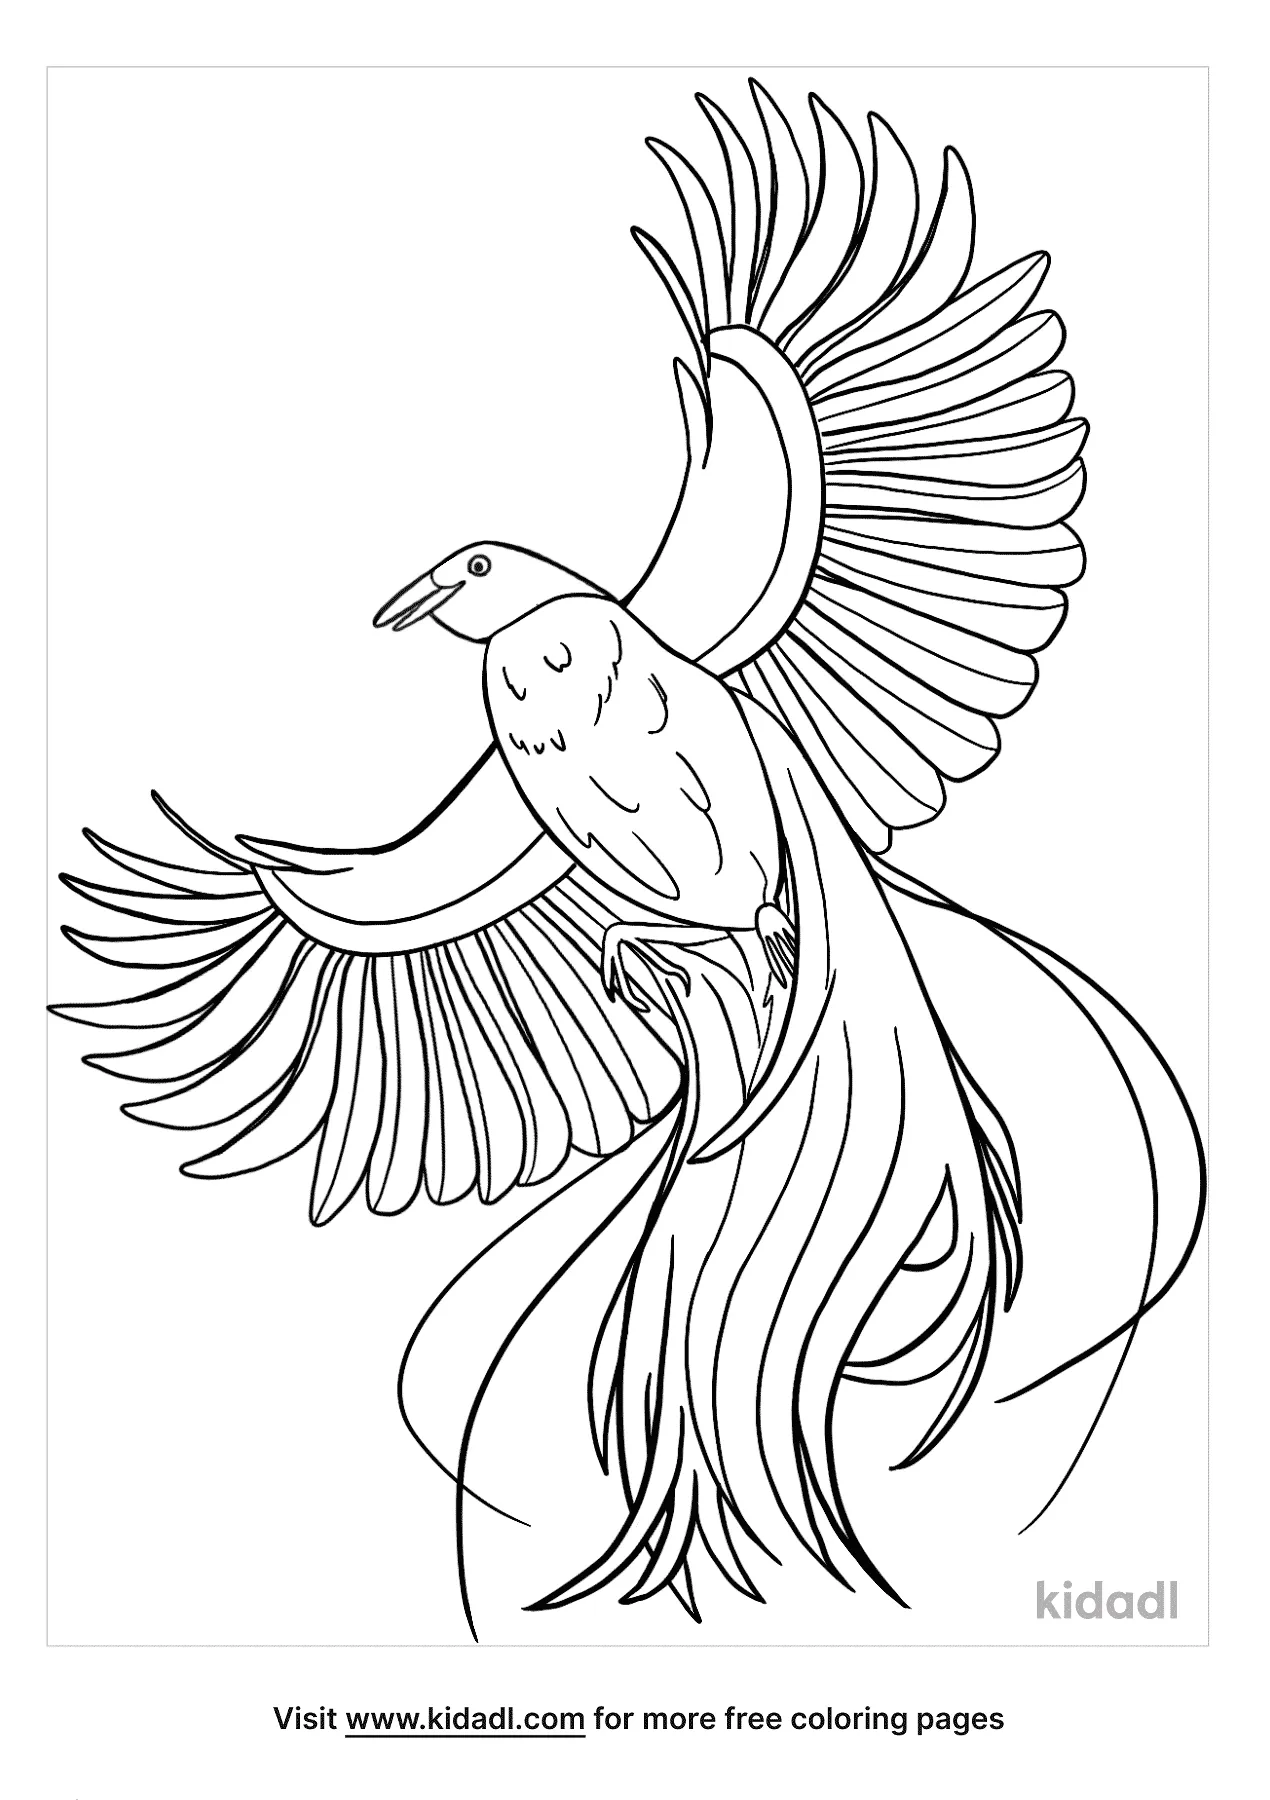 Bird Of Paradise Coloring Pages   Free Birds Coloring Pages   Kidadl